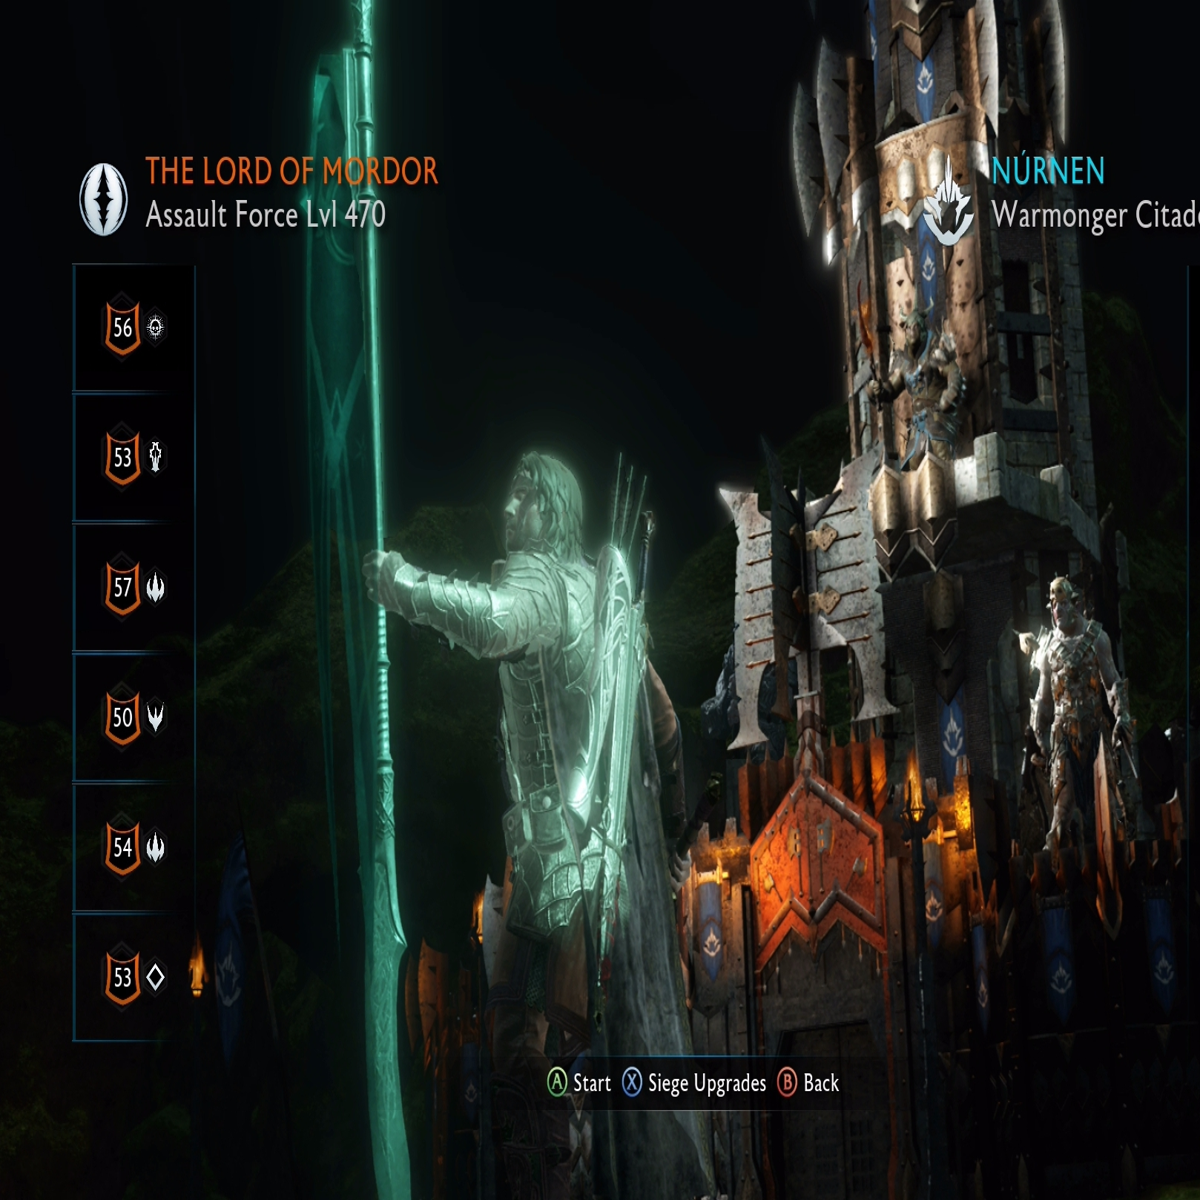 Drakes, Middle-earth: Shadow of War Wiki